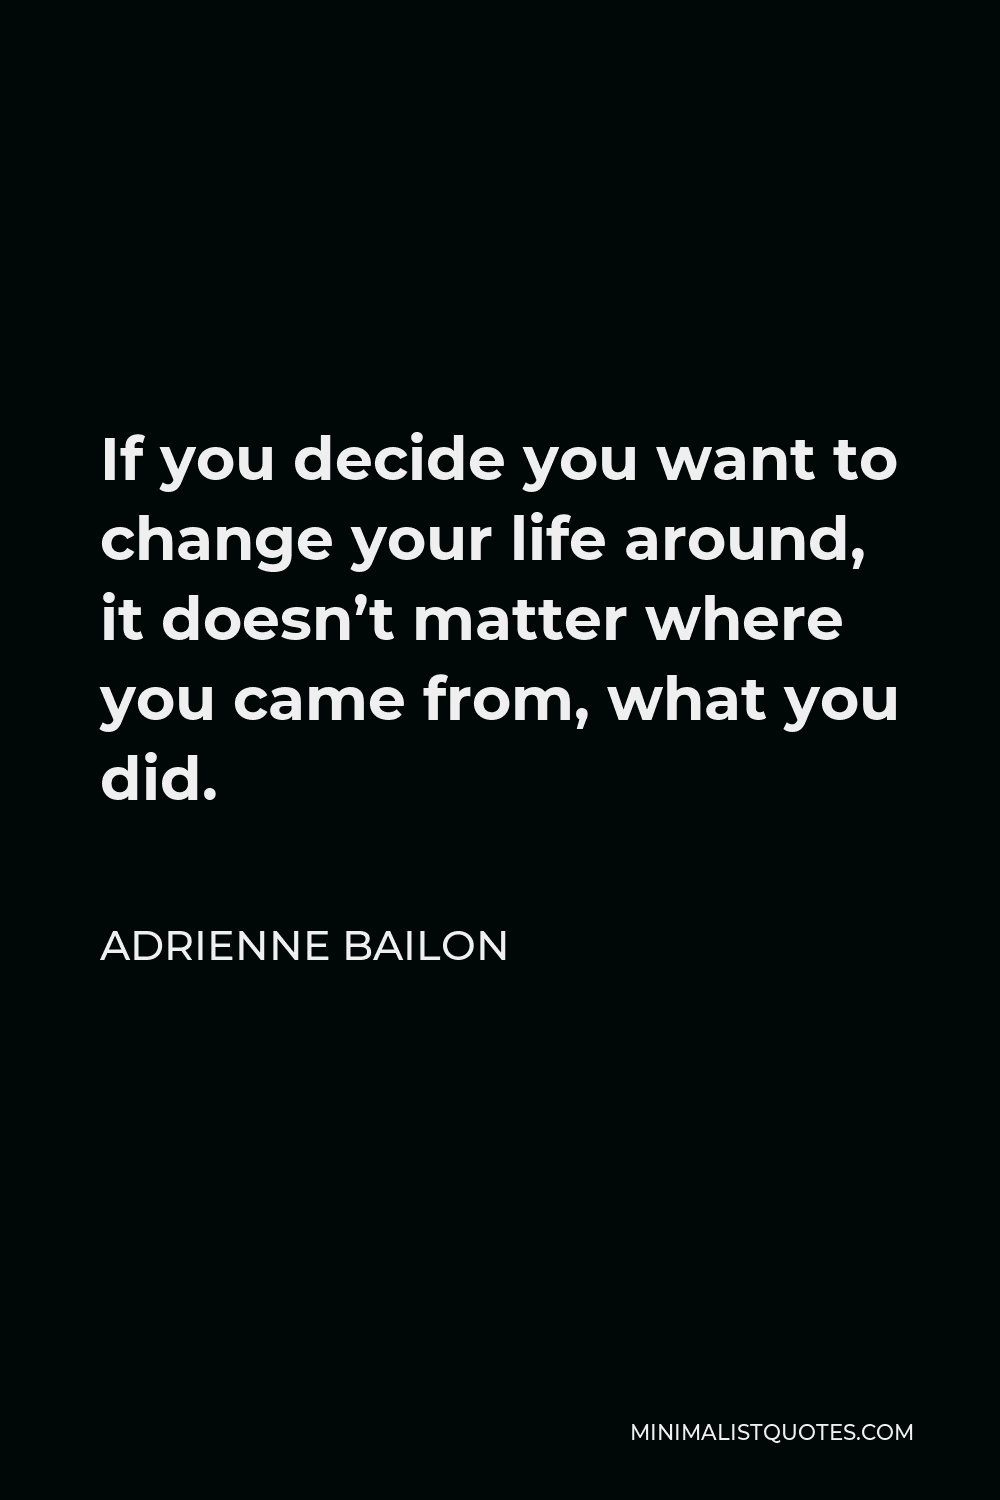 Adrienne Bailon Quote - If you decide you want to change your life around, it doesn’t matter where you came from, what you did.